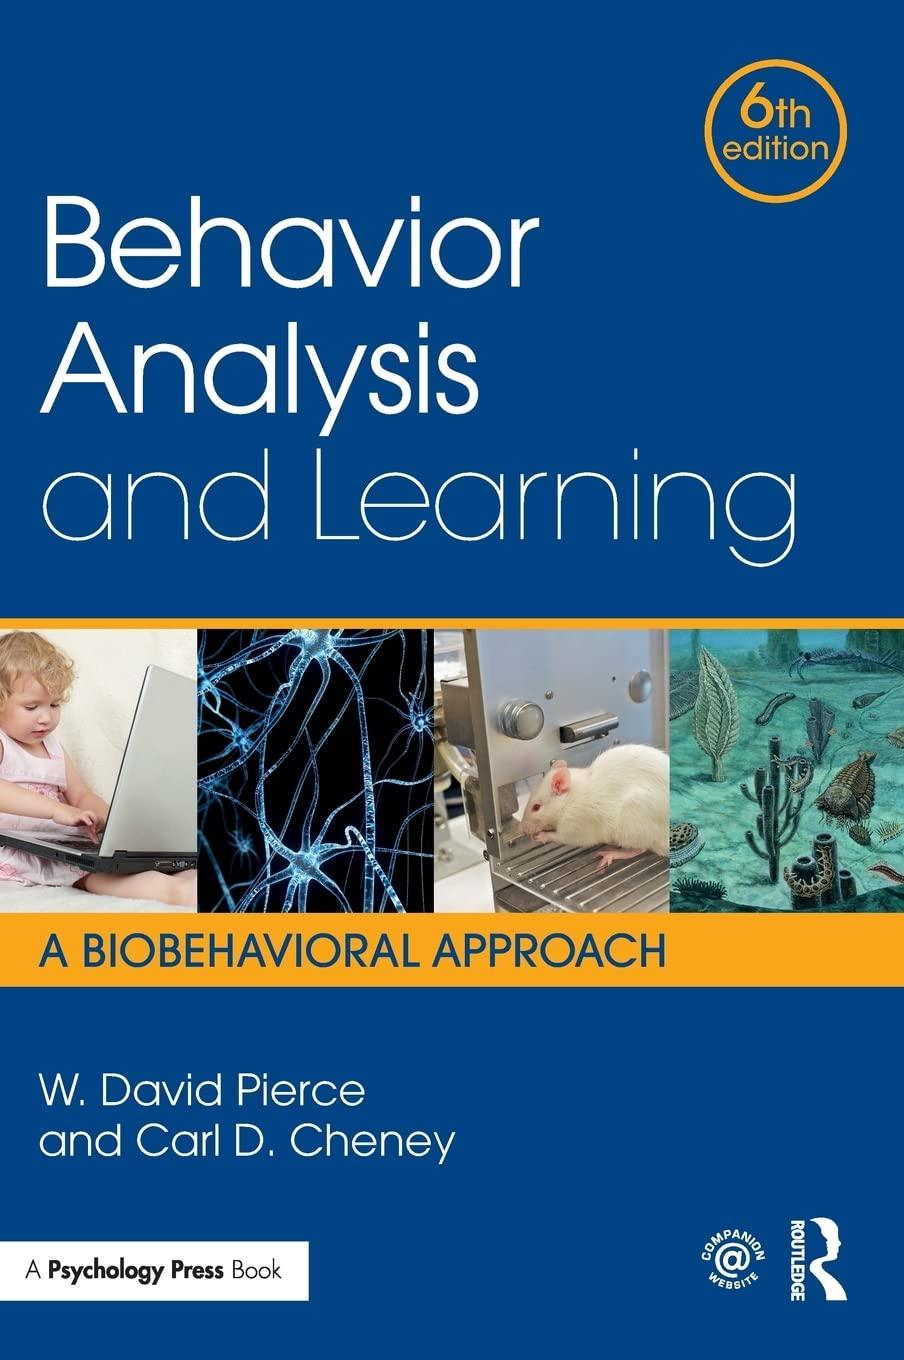 behavior analysis and learning a biobehavioral approach 6th edition w. david pierce, carl d. cheney